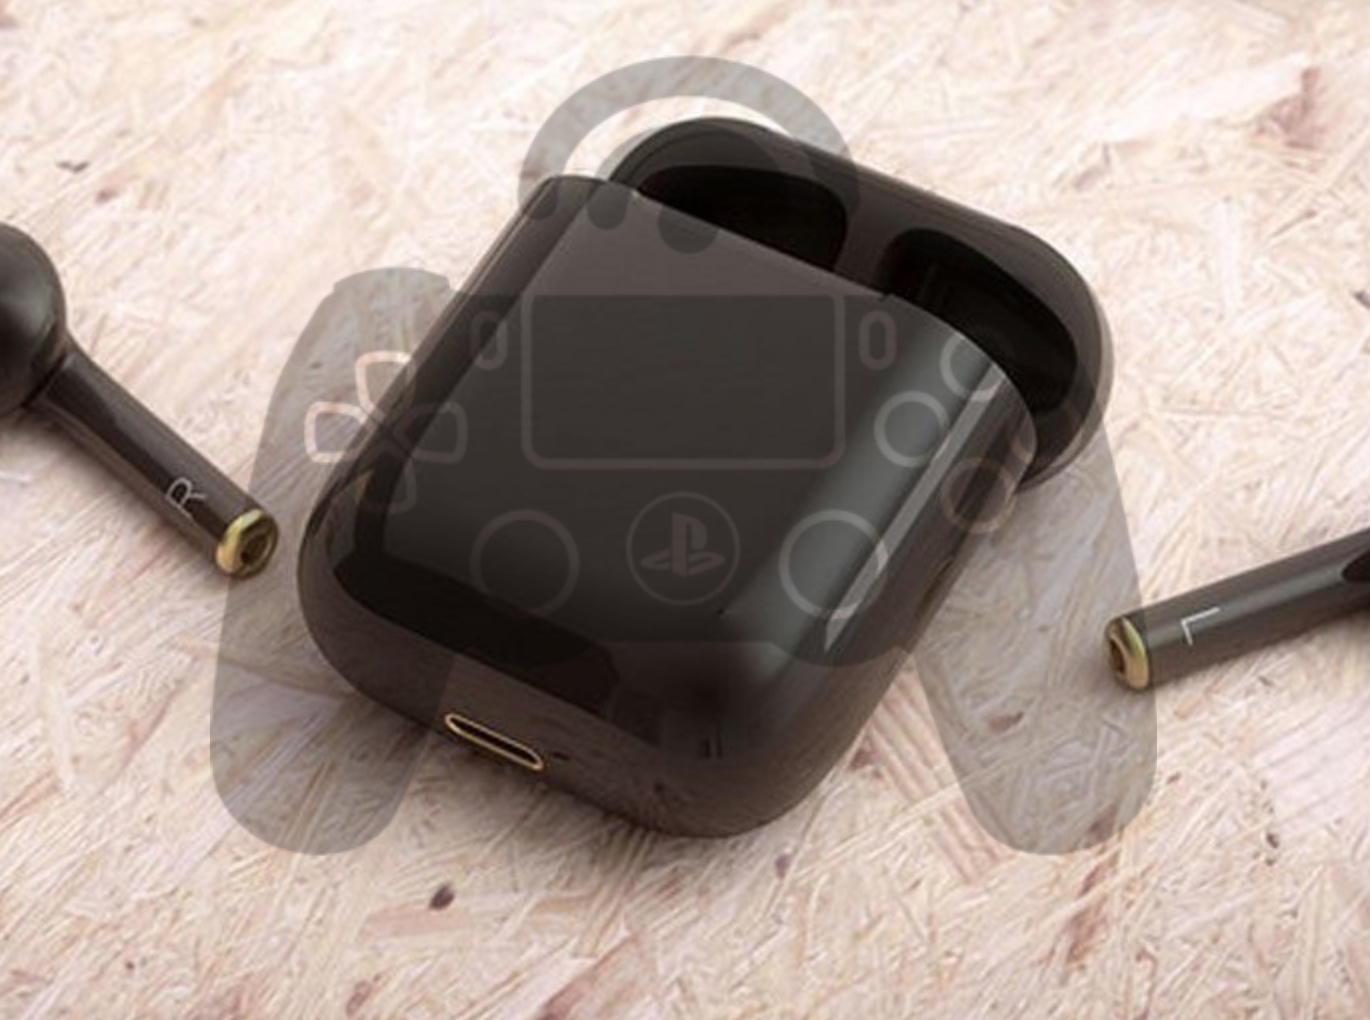 connecting apple airpods to ps4